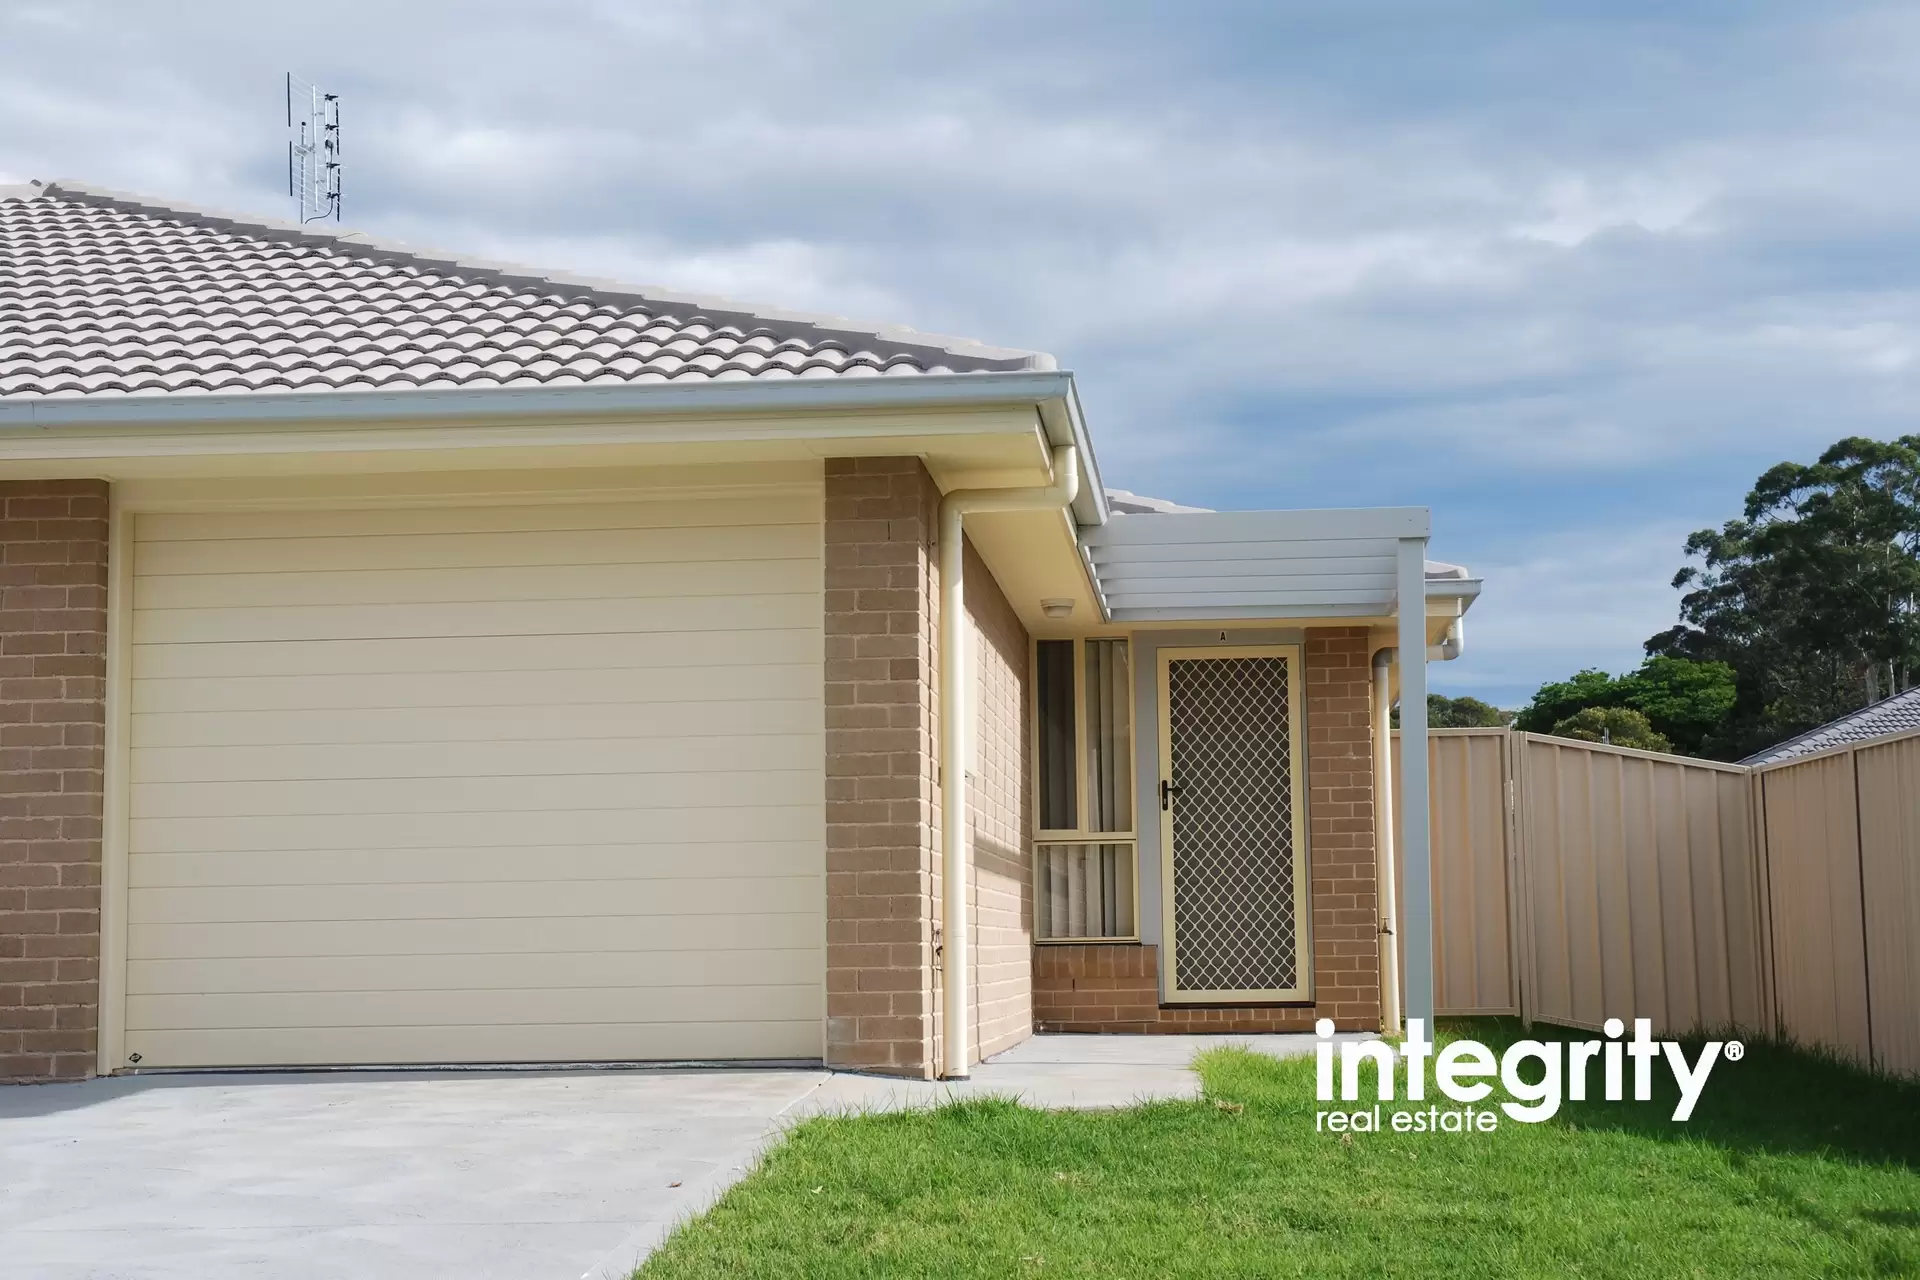 31A Depot Road, West Nowra For Lease by Integrity Real Estate - image 1